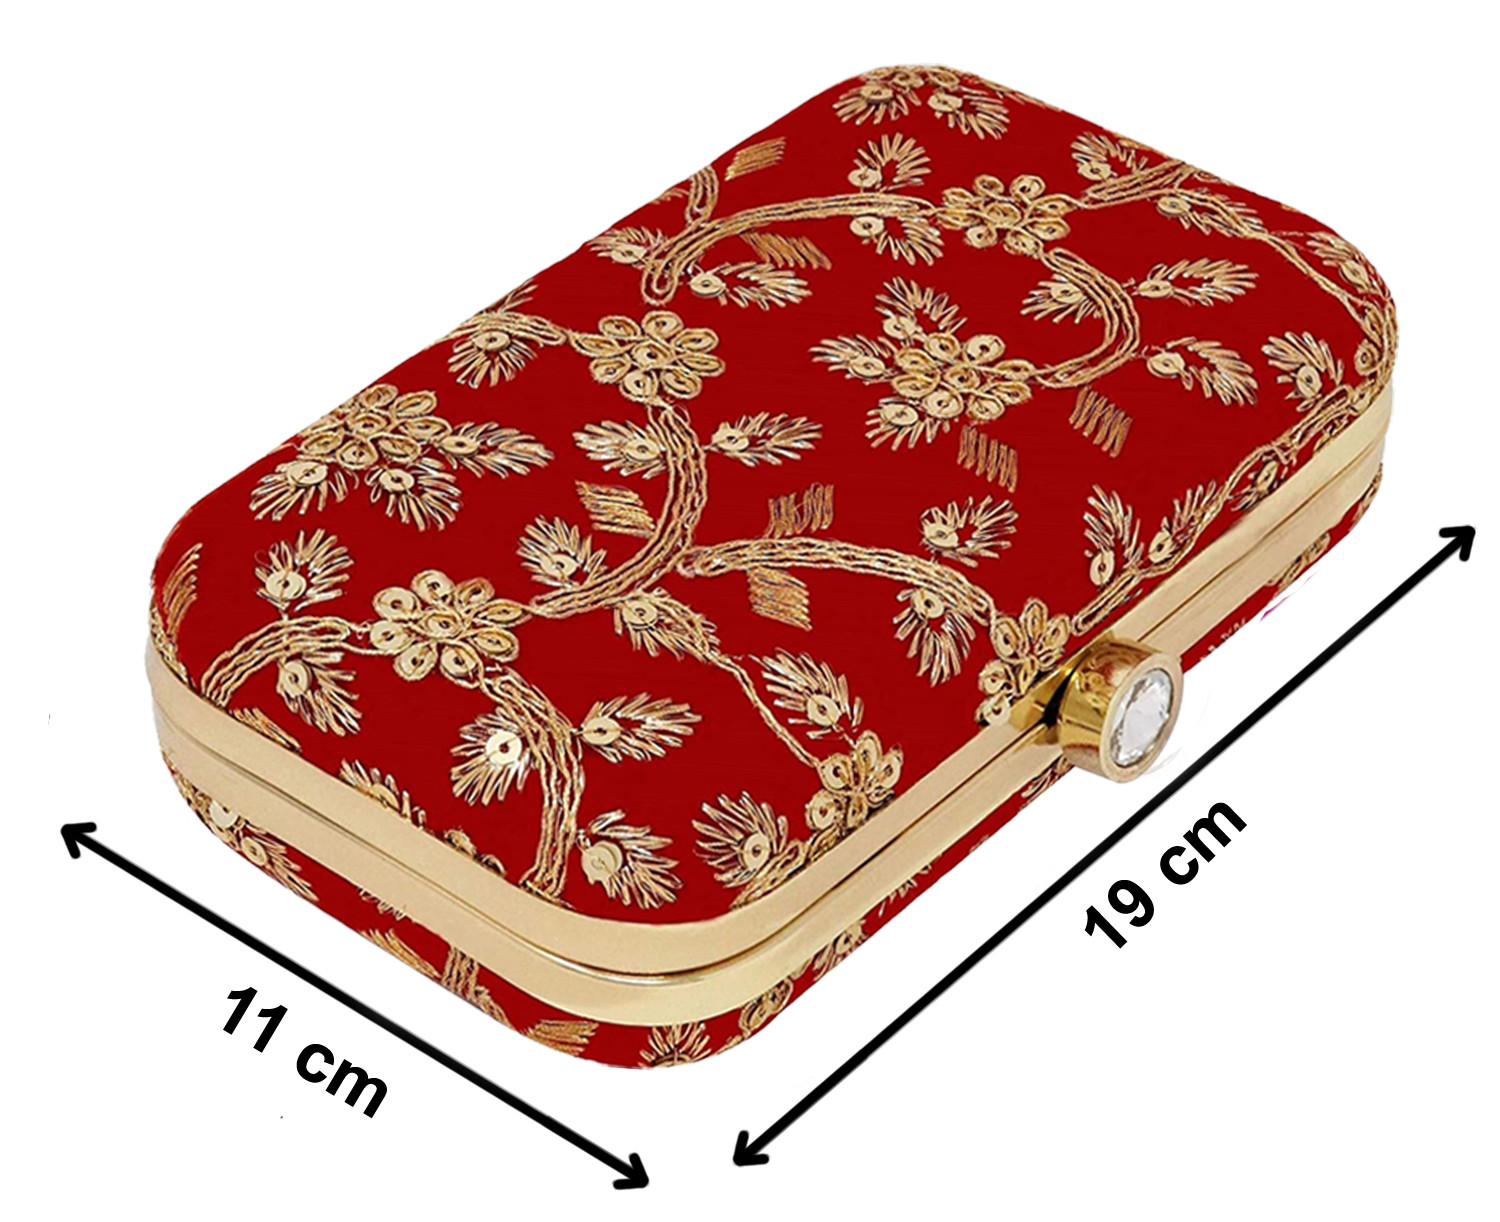 Kuber Industries Party Wear Clutch Bag Purse Handbag For Bridal, Casual, Party, Wedding,Set Of 2 (Cream & Maroon)-KUBMRT11882